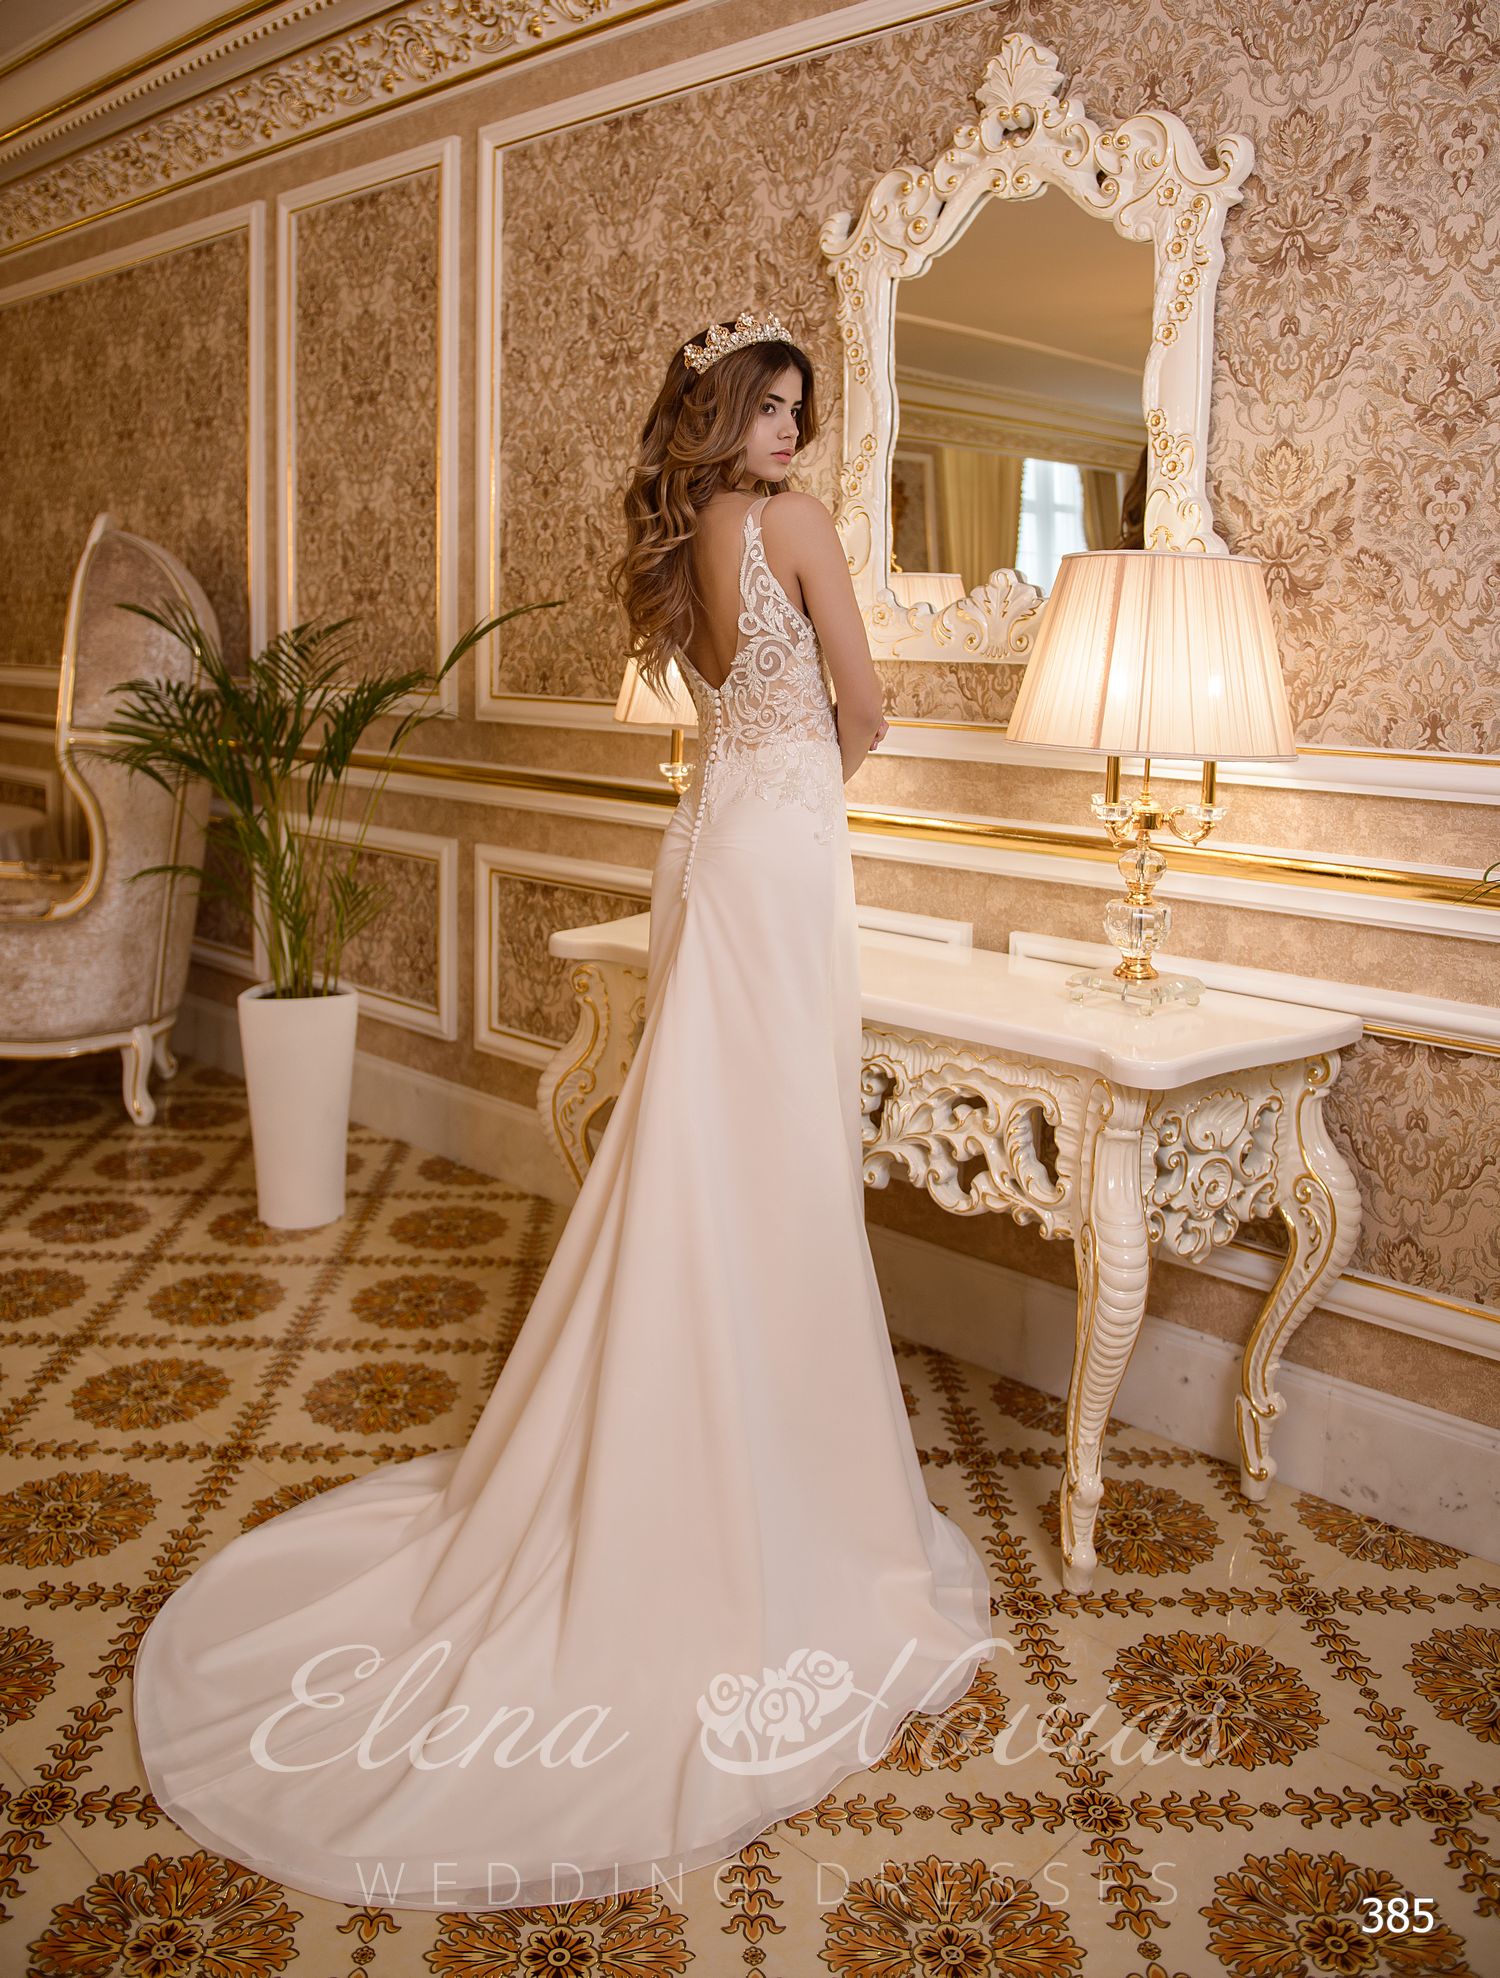 Wedding dress with open back from the "ElenaNovias»